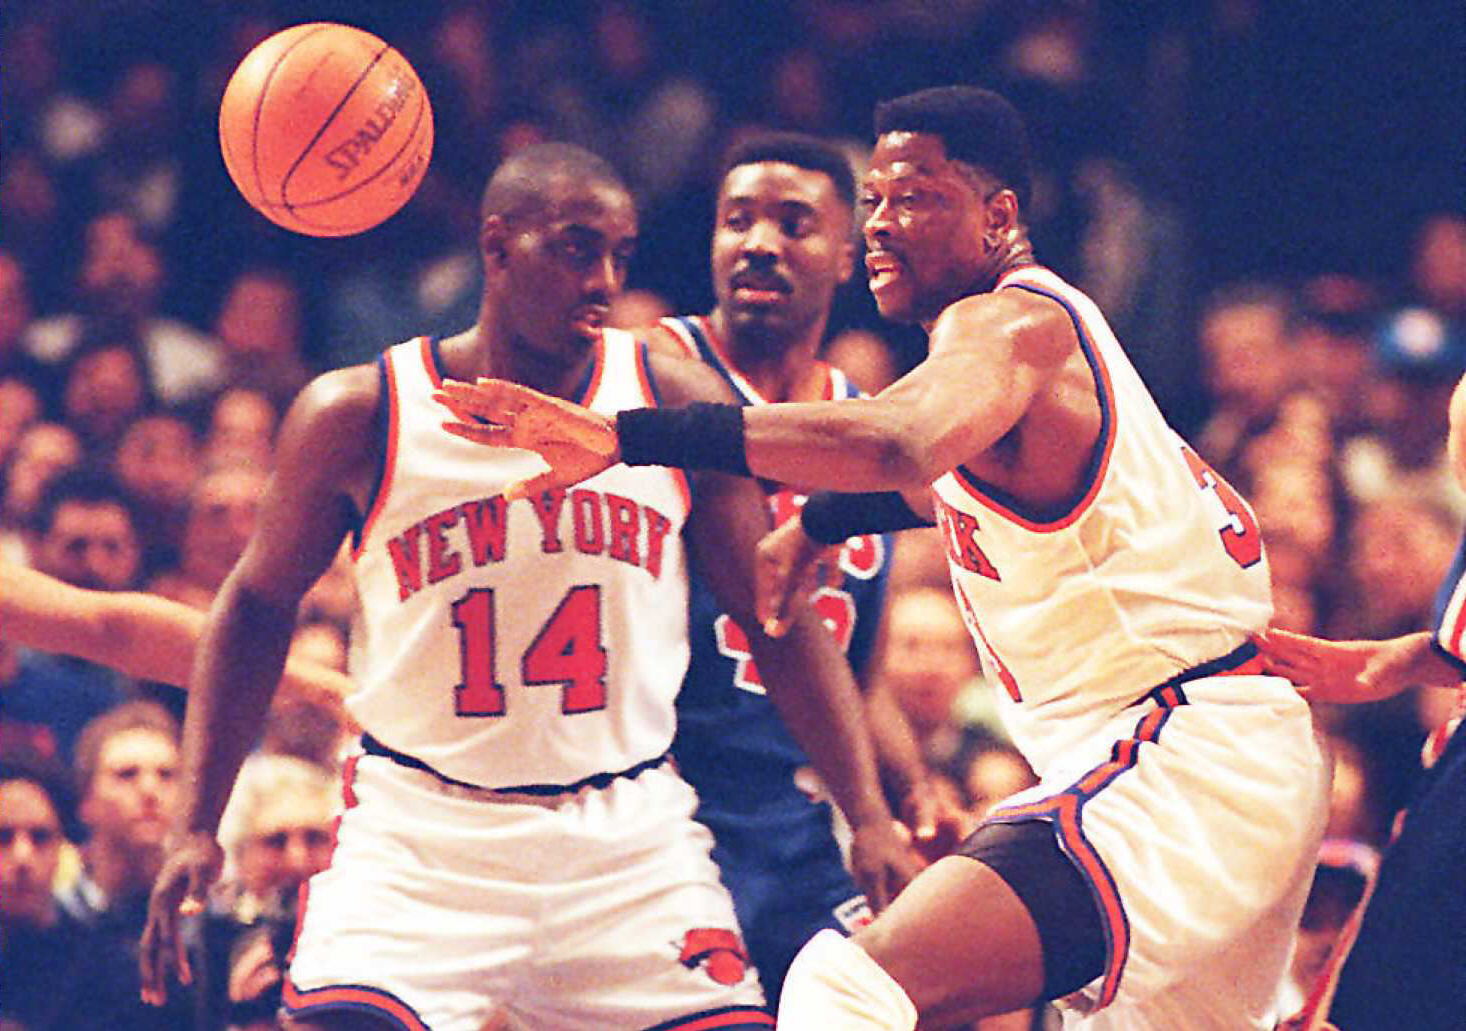 The ball gets away from New York Knicks Patrick Ew